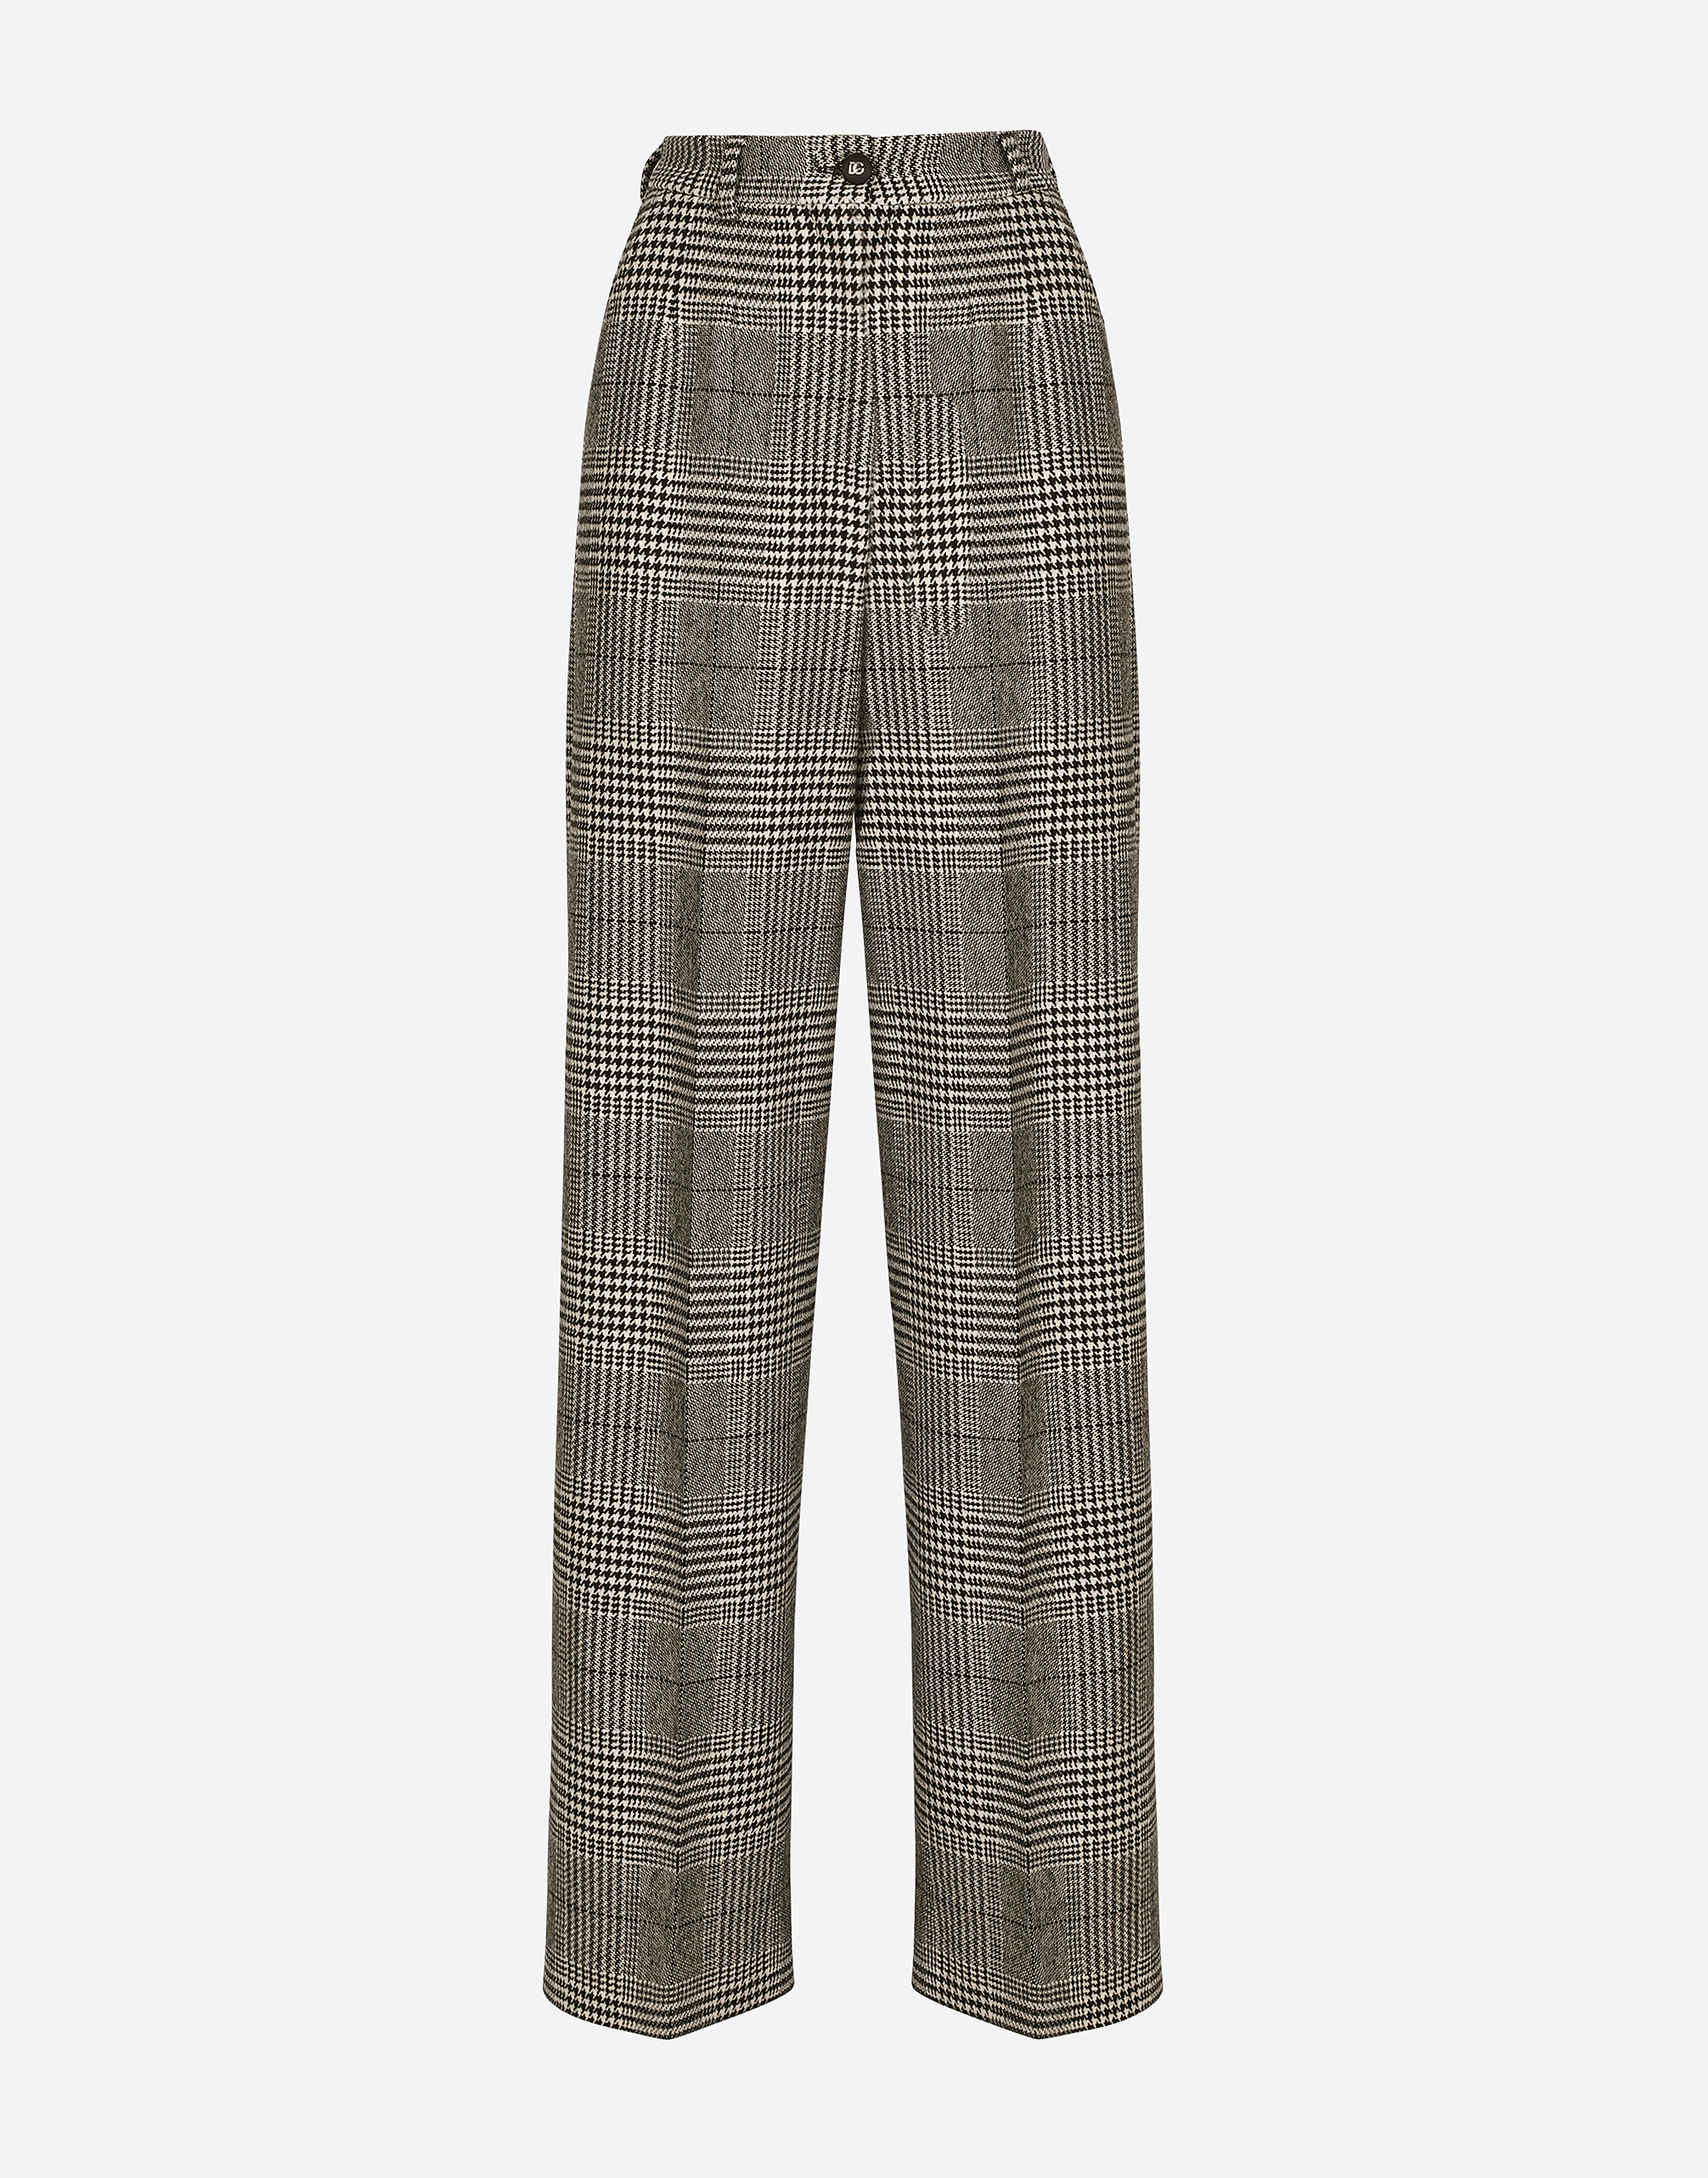 Flared glen plaid pants in Multicolor